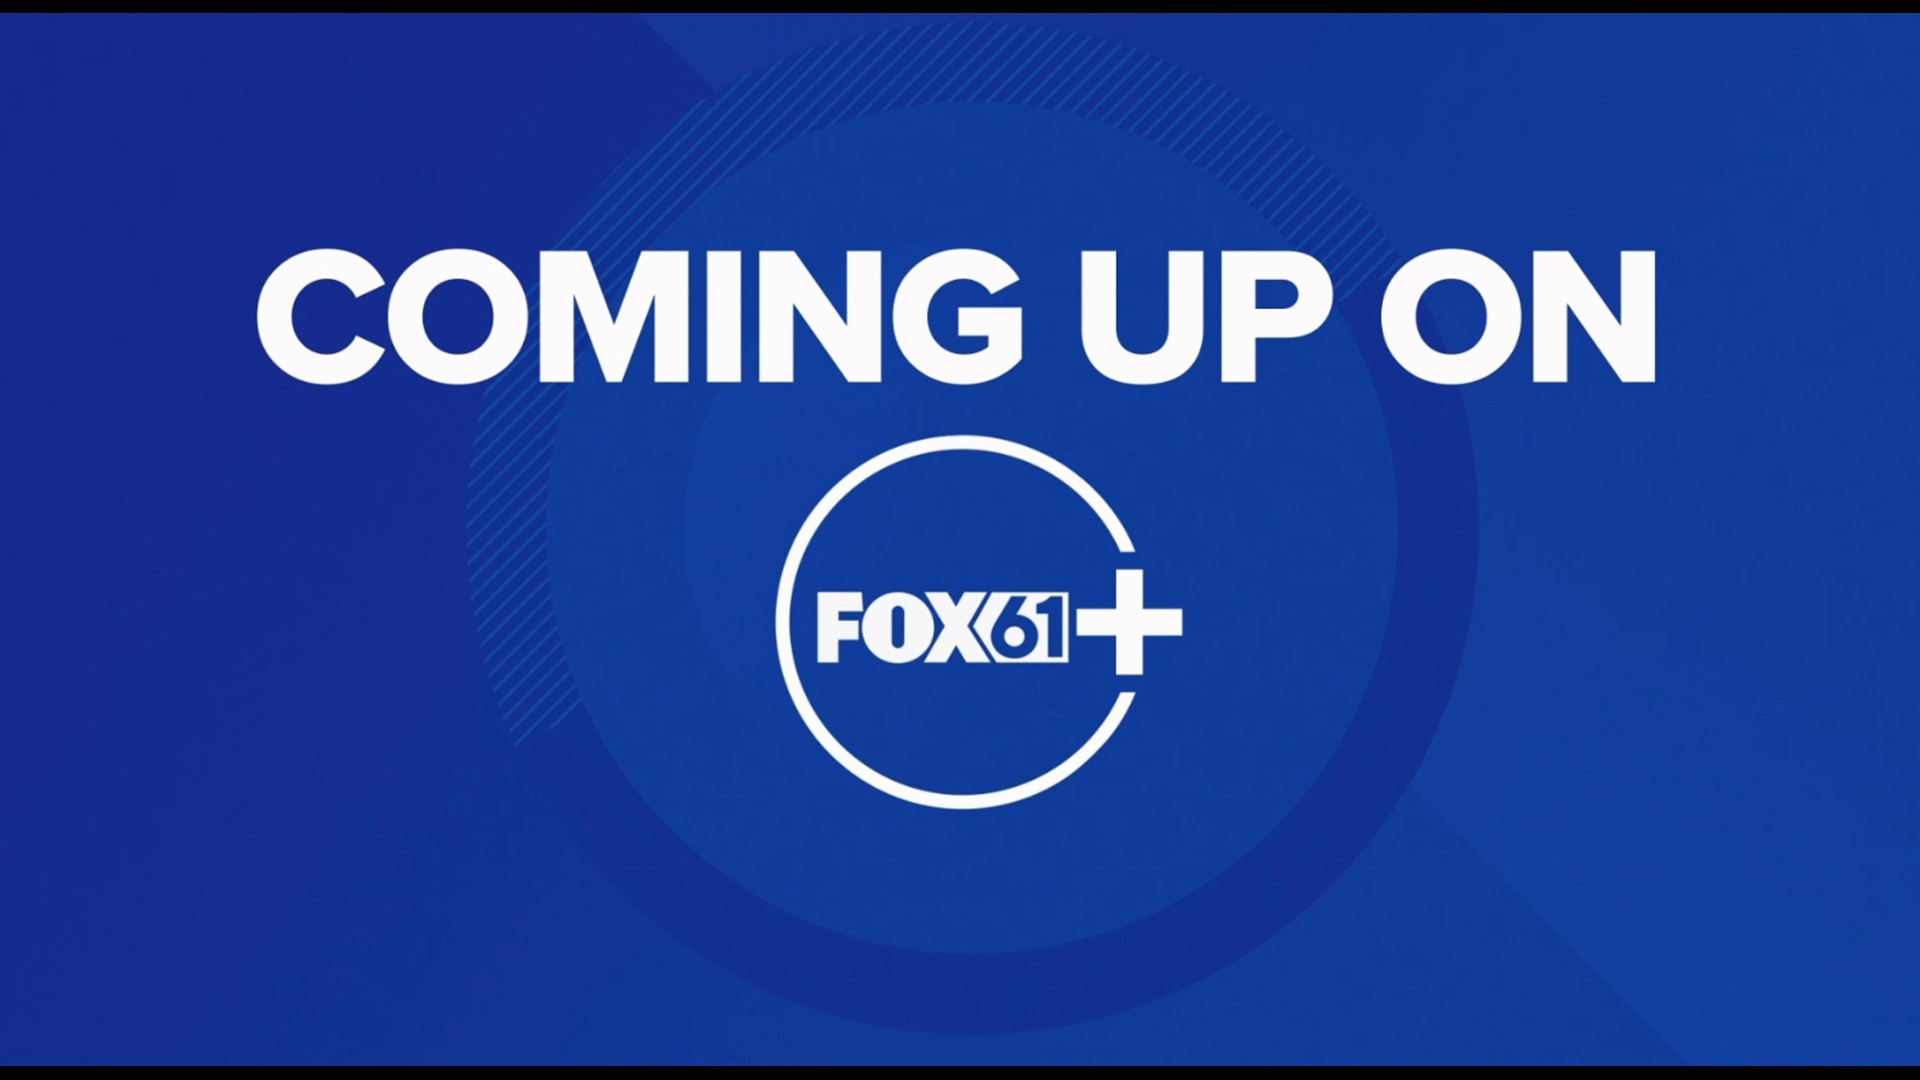 THIS IS A PROMO FOR FOX61+